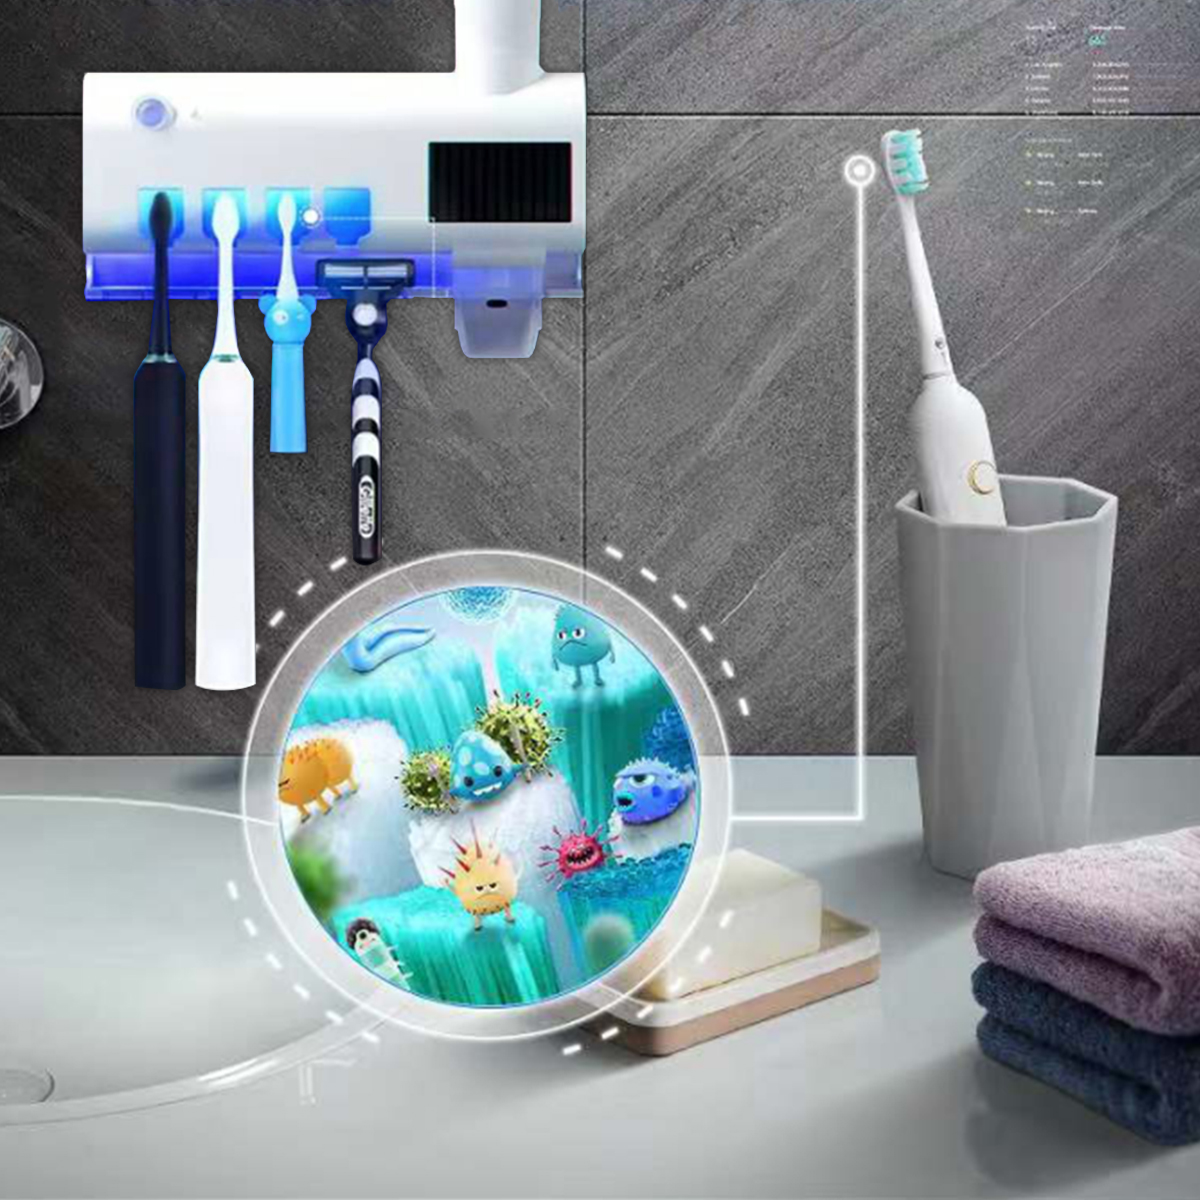 Solar-Charging-Infrared-Toothbrush-Sterilizer-Holder-Automatic-Toothpaste-Dispenser-Magnetic-Suction-1622988-9